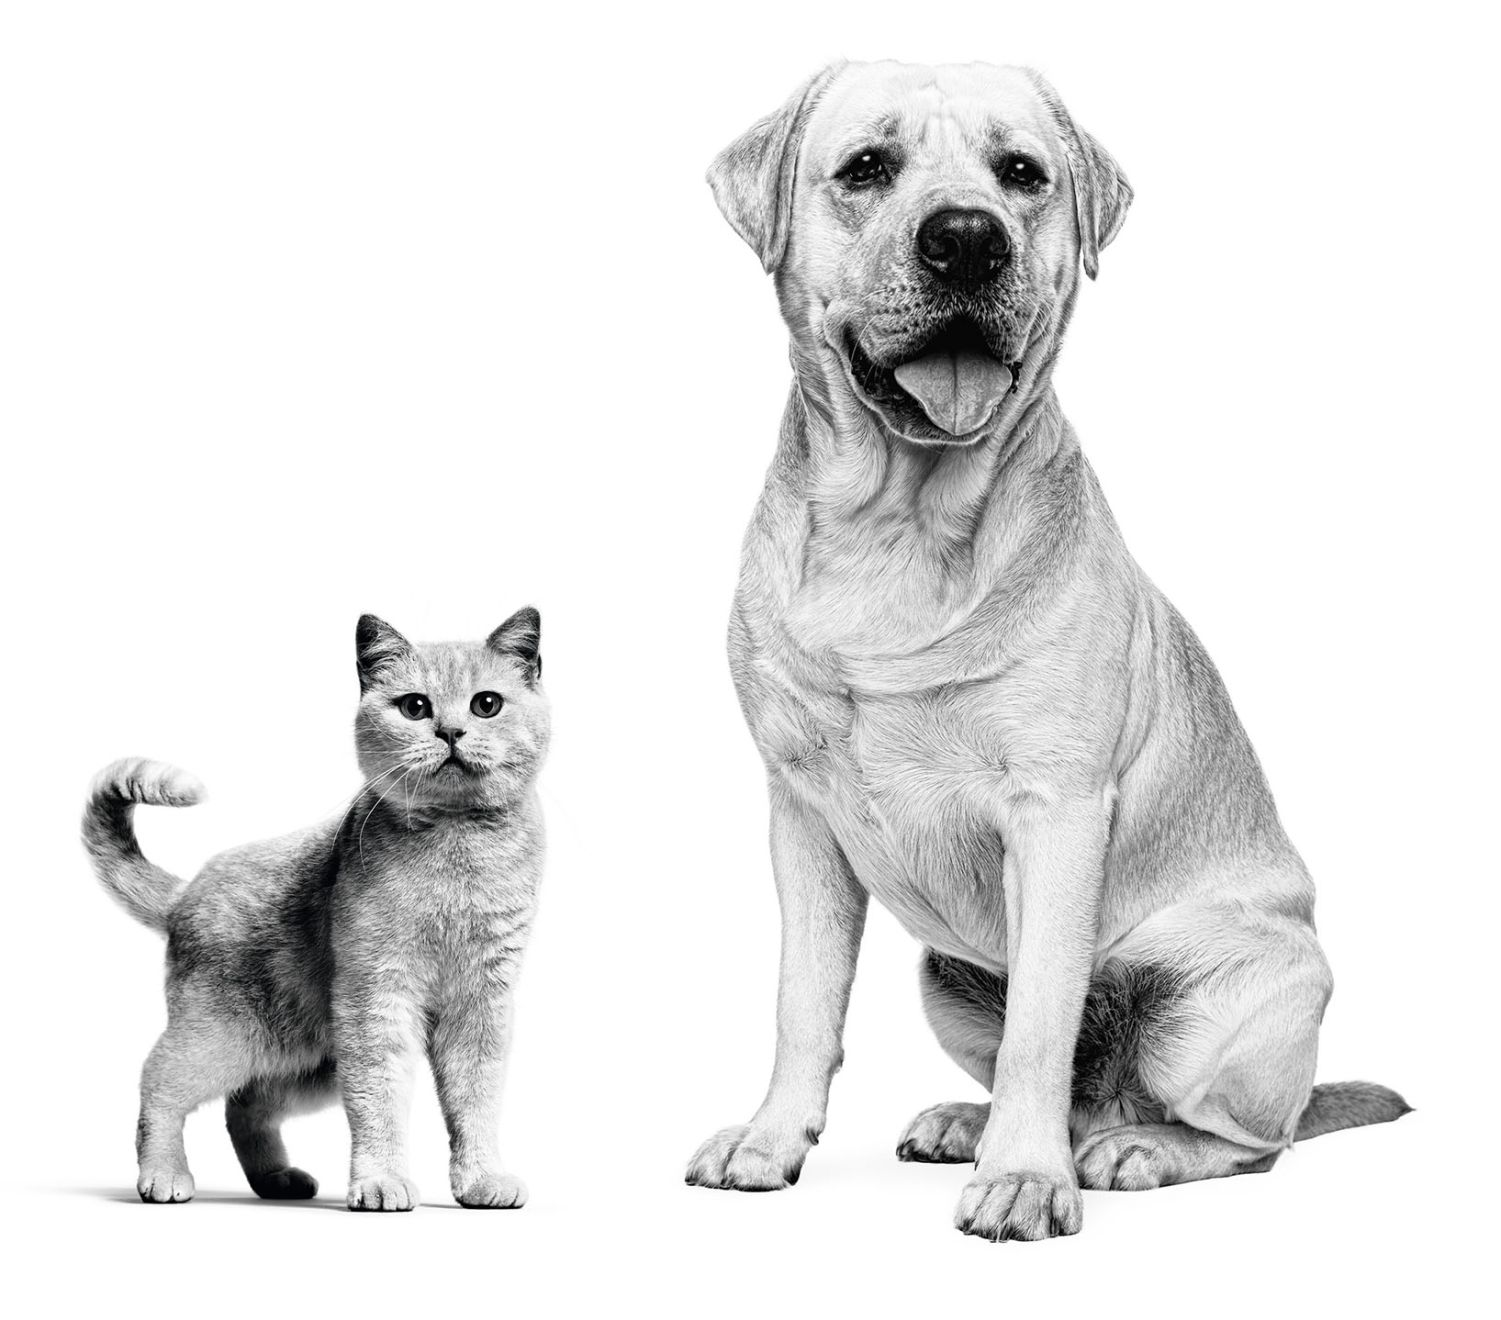 Labrador Retriever and British Shorthair adults eating from red bowls in black and white on a white background